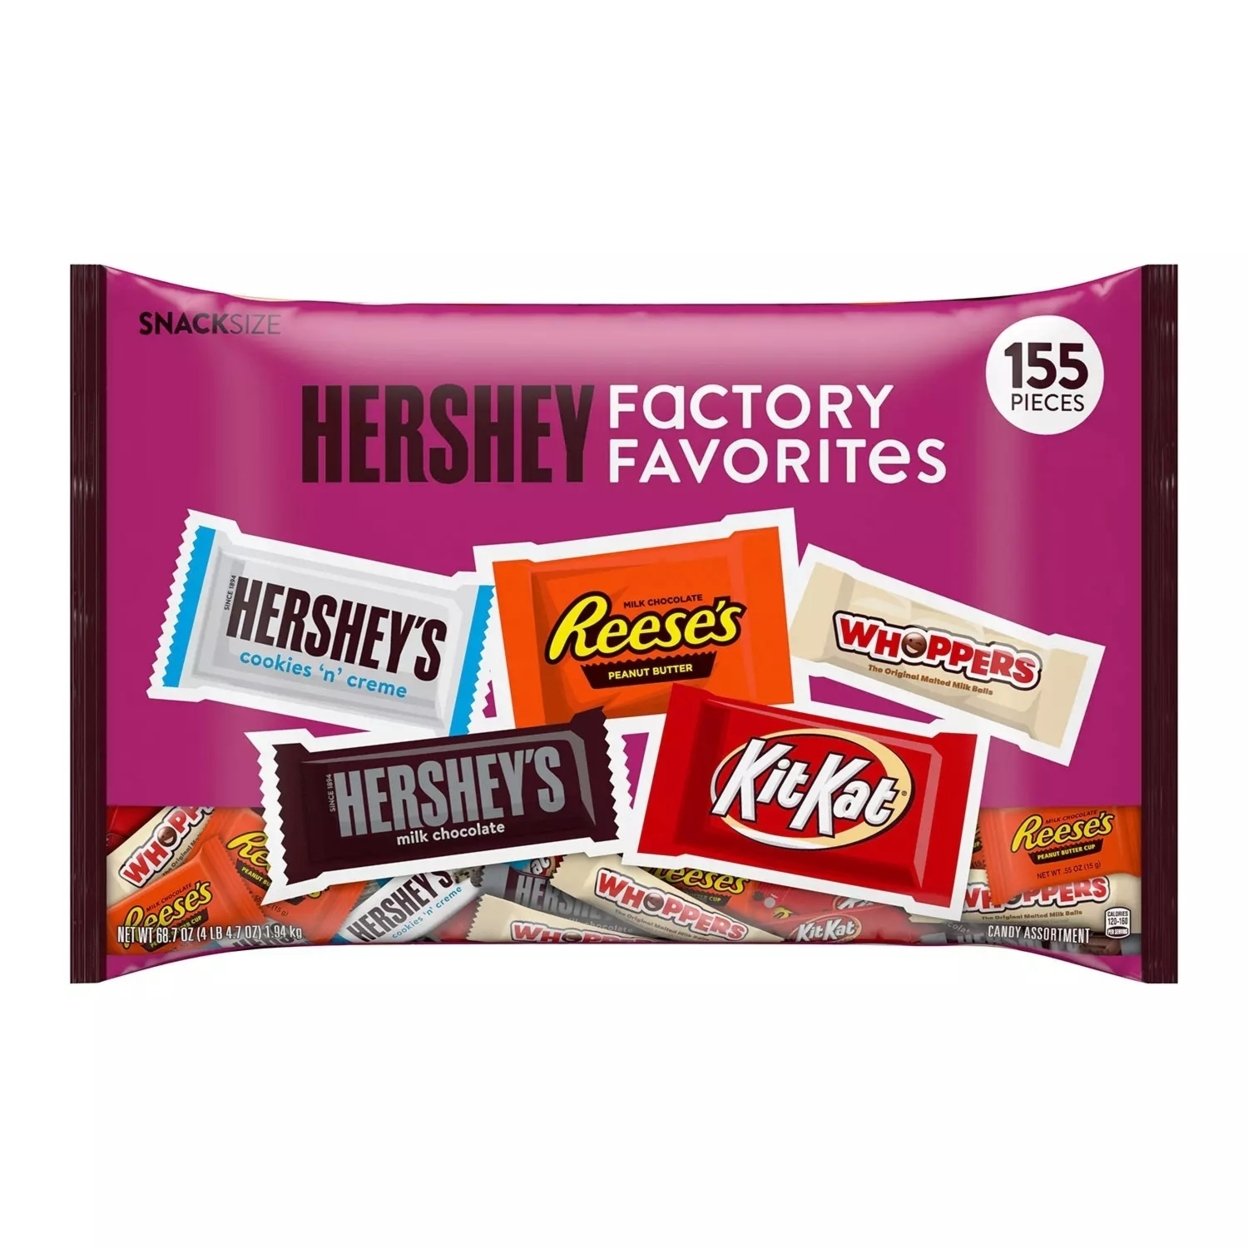 Hershey Factory Favorites Chocolate And Creme Assortment, 68.7 Ounce (155 Piece)